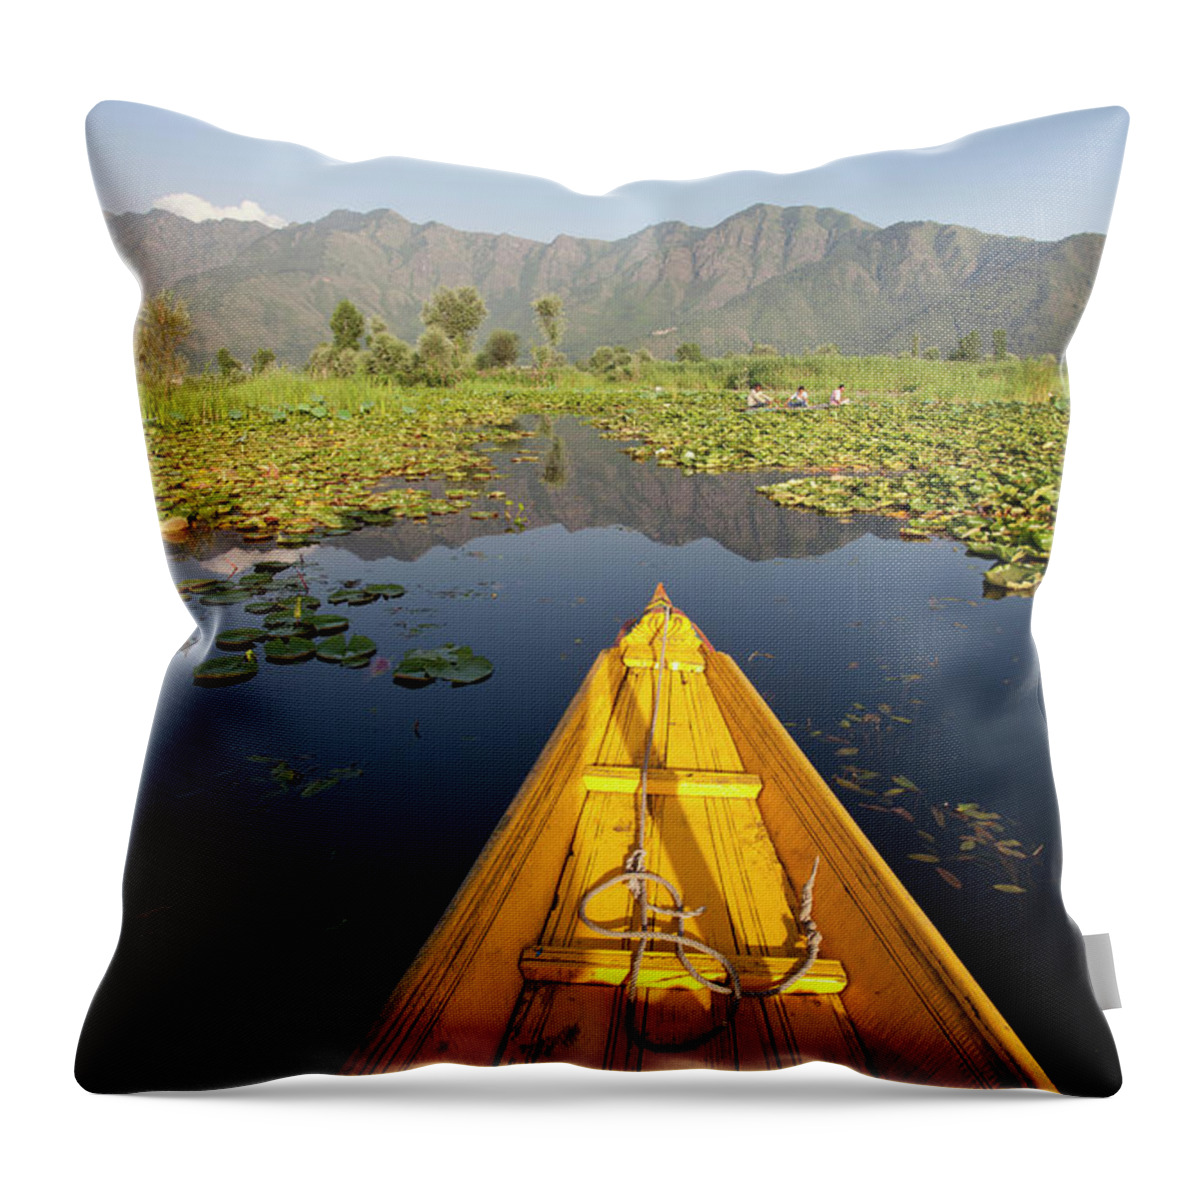 Scenics Throw Pillow featuring the photograph Shikara In The Dal Lake, Srinagar by Travel Photographer Specialized In Asia * Sylvain Brajeul